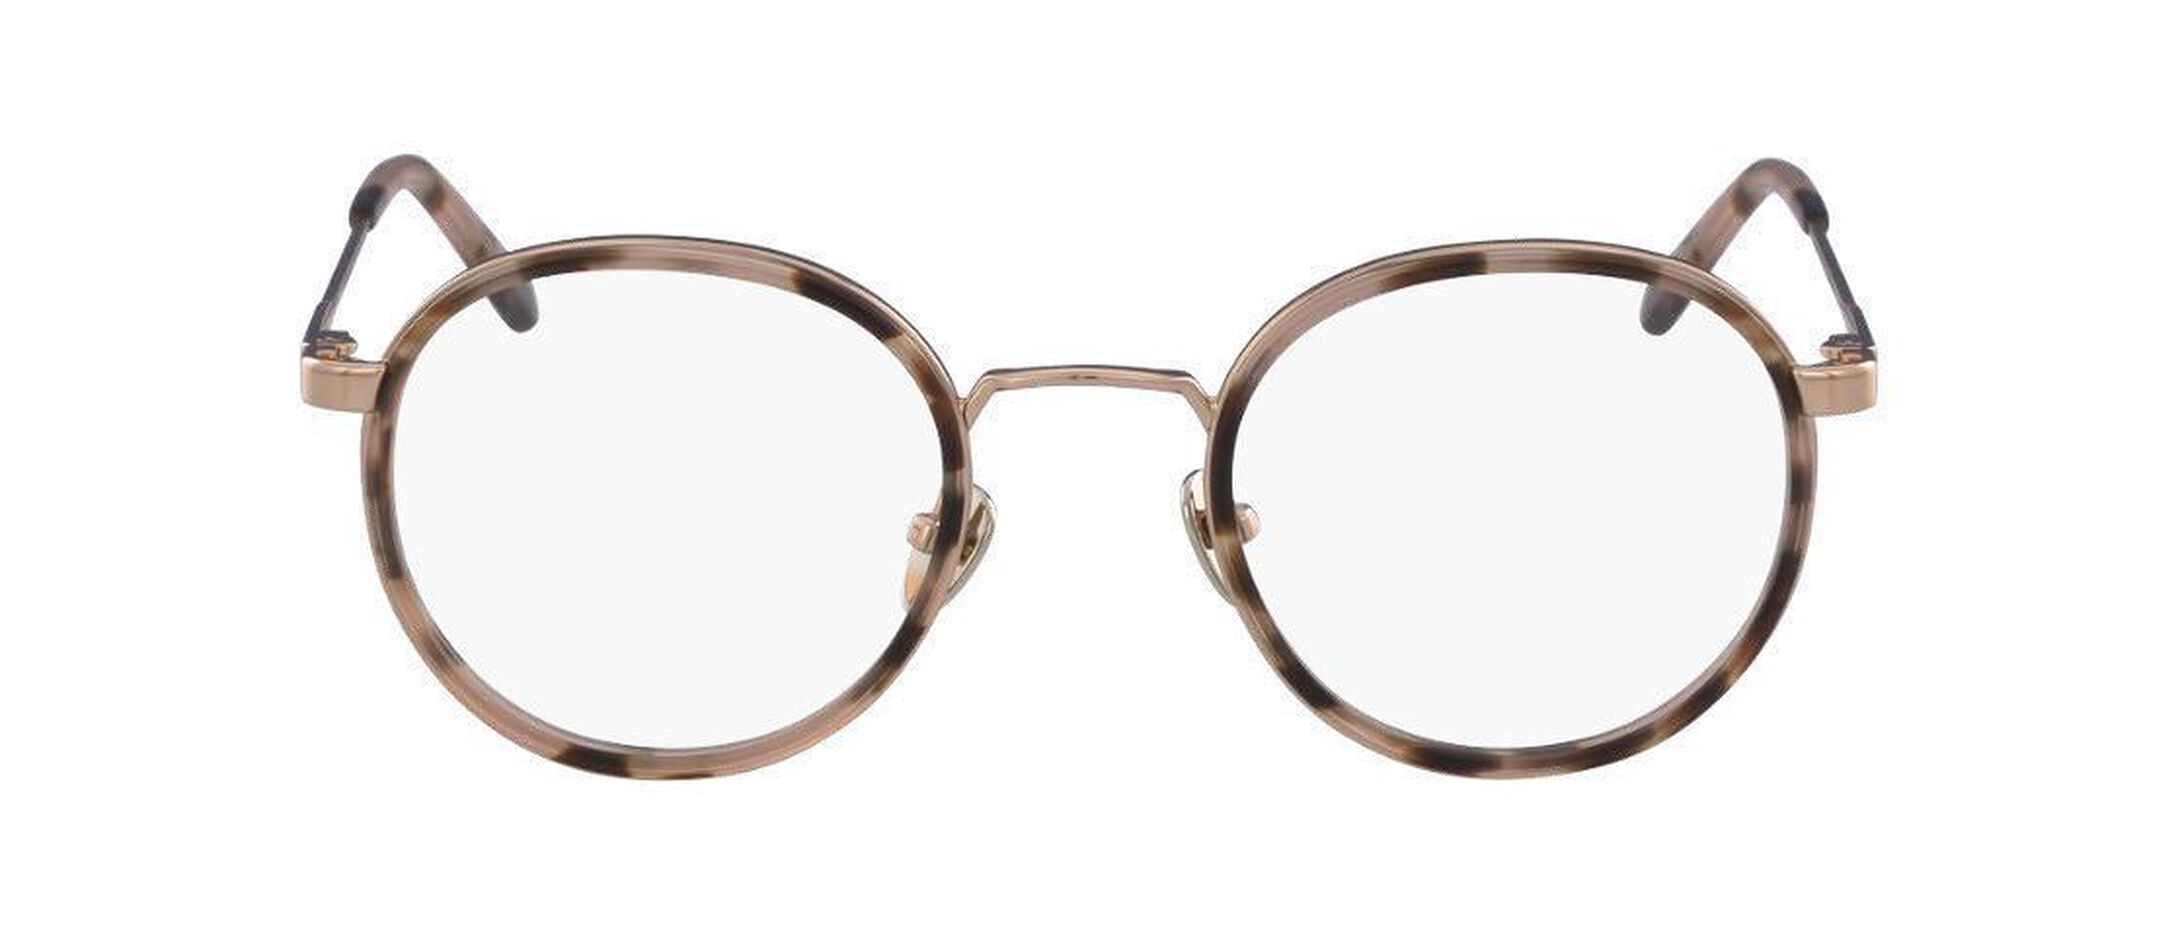 Calvin Klein CK18107 Glasses | Free Shipping and Returns | Eyeconic